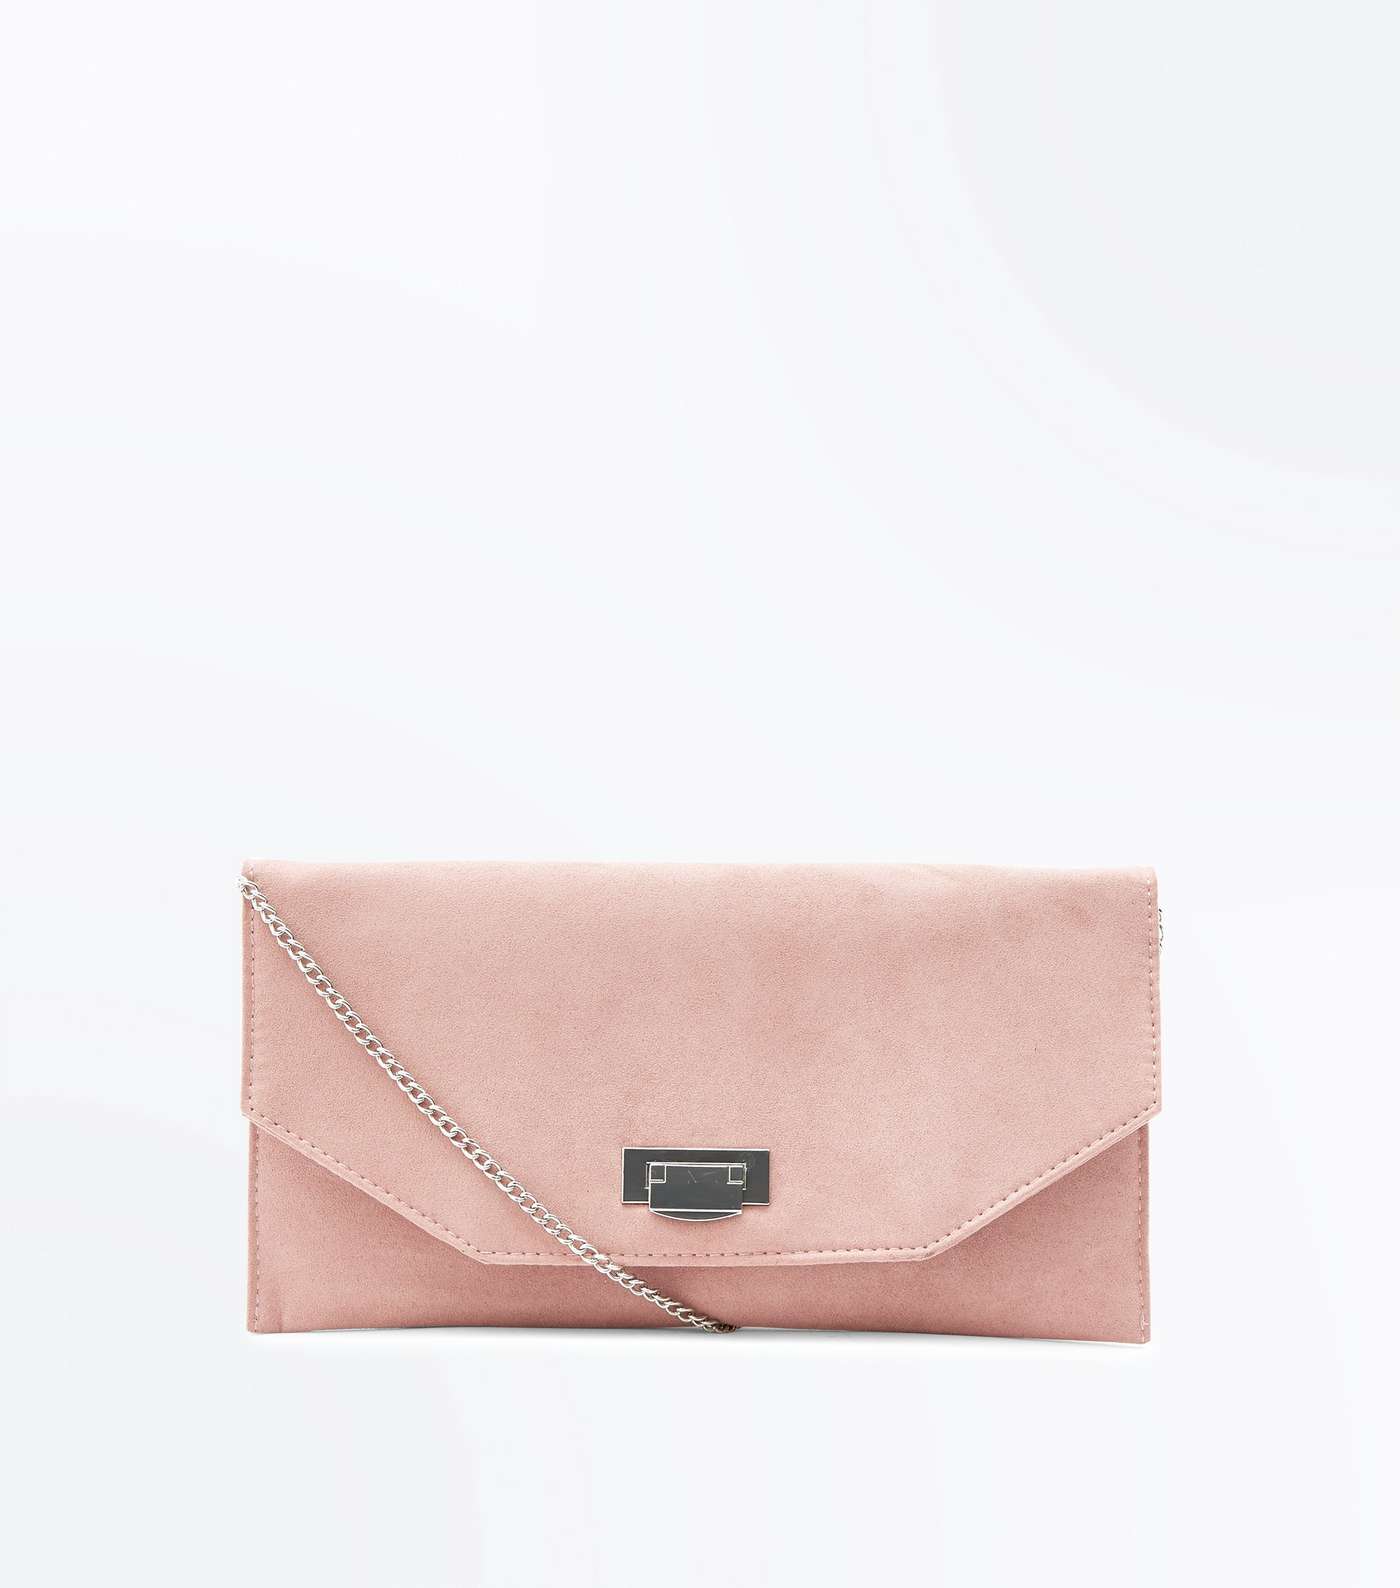 Nude Chain Strap Envelope Clutch Bag